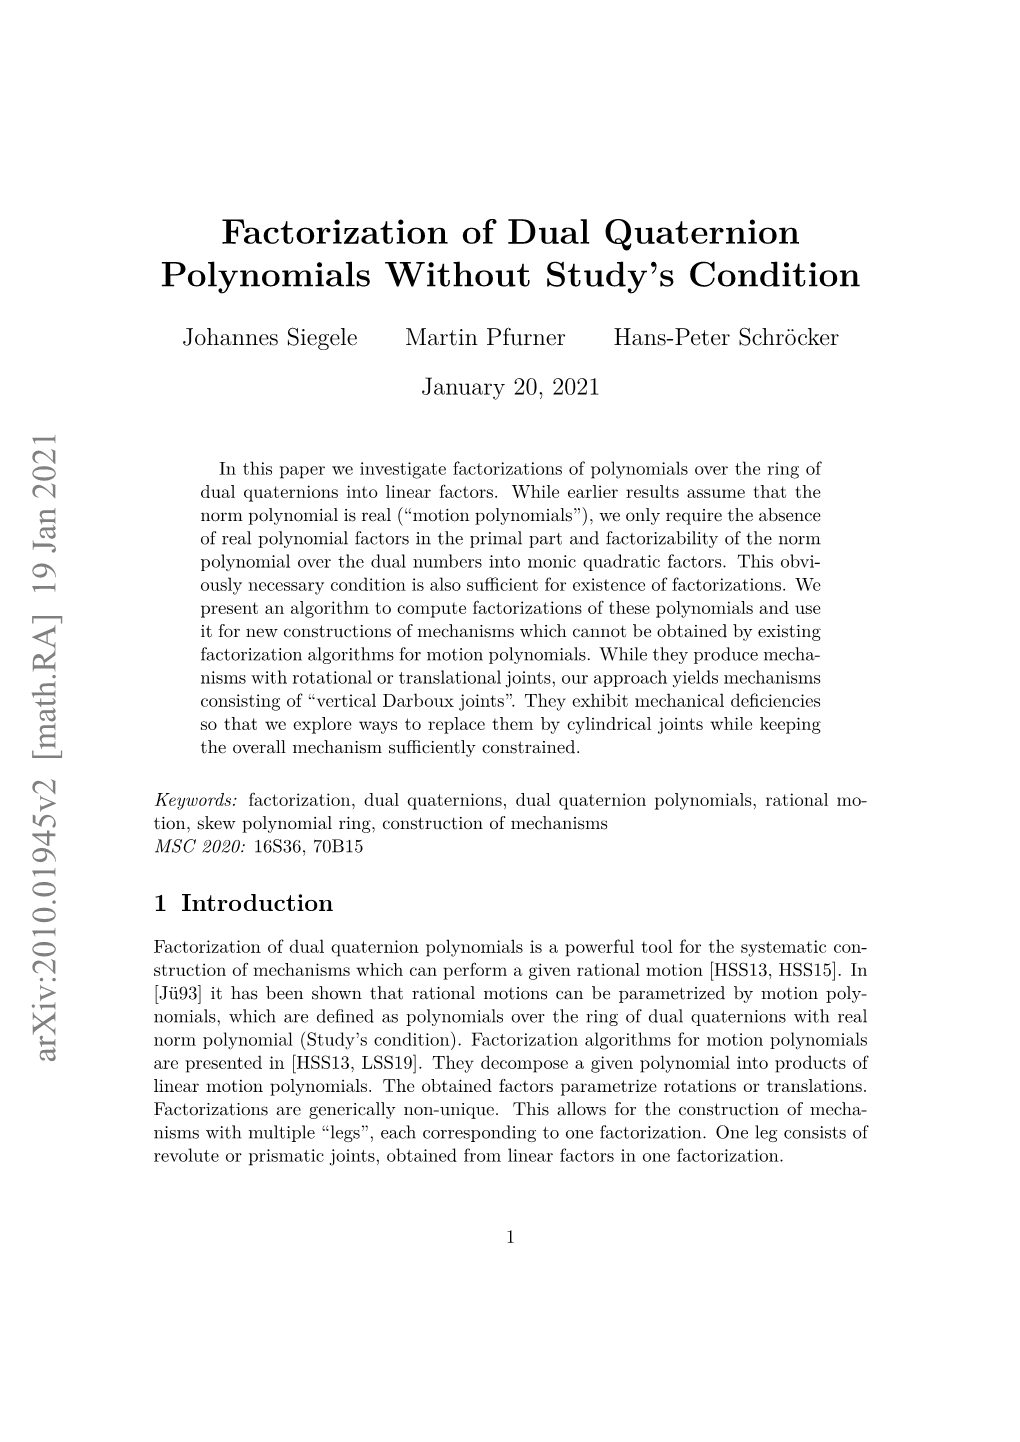 Factorization of Dual Quaternion Polynomials Without Study's